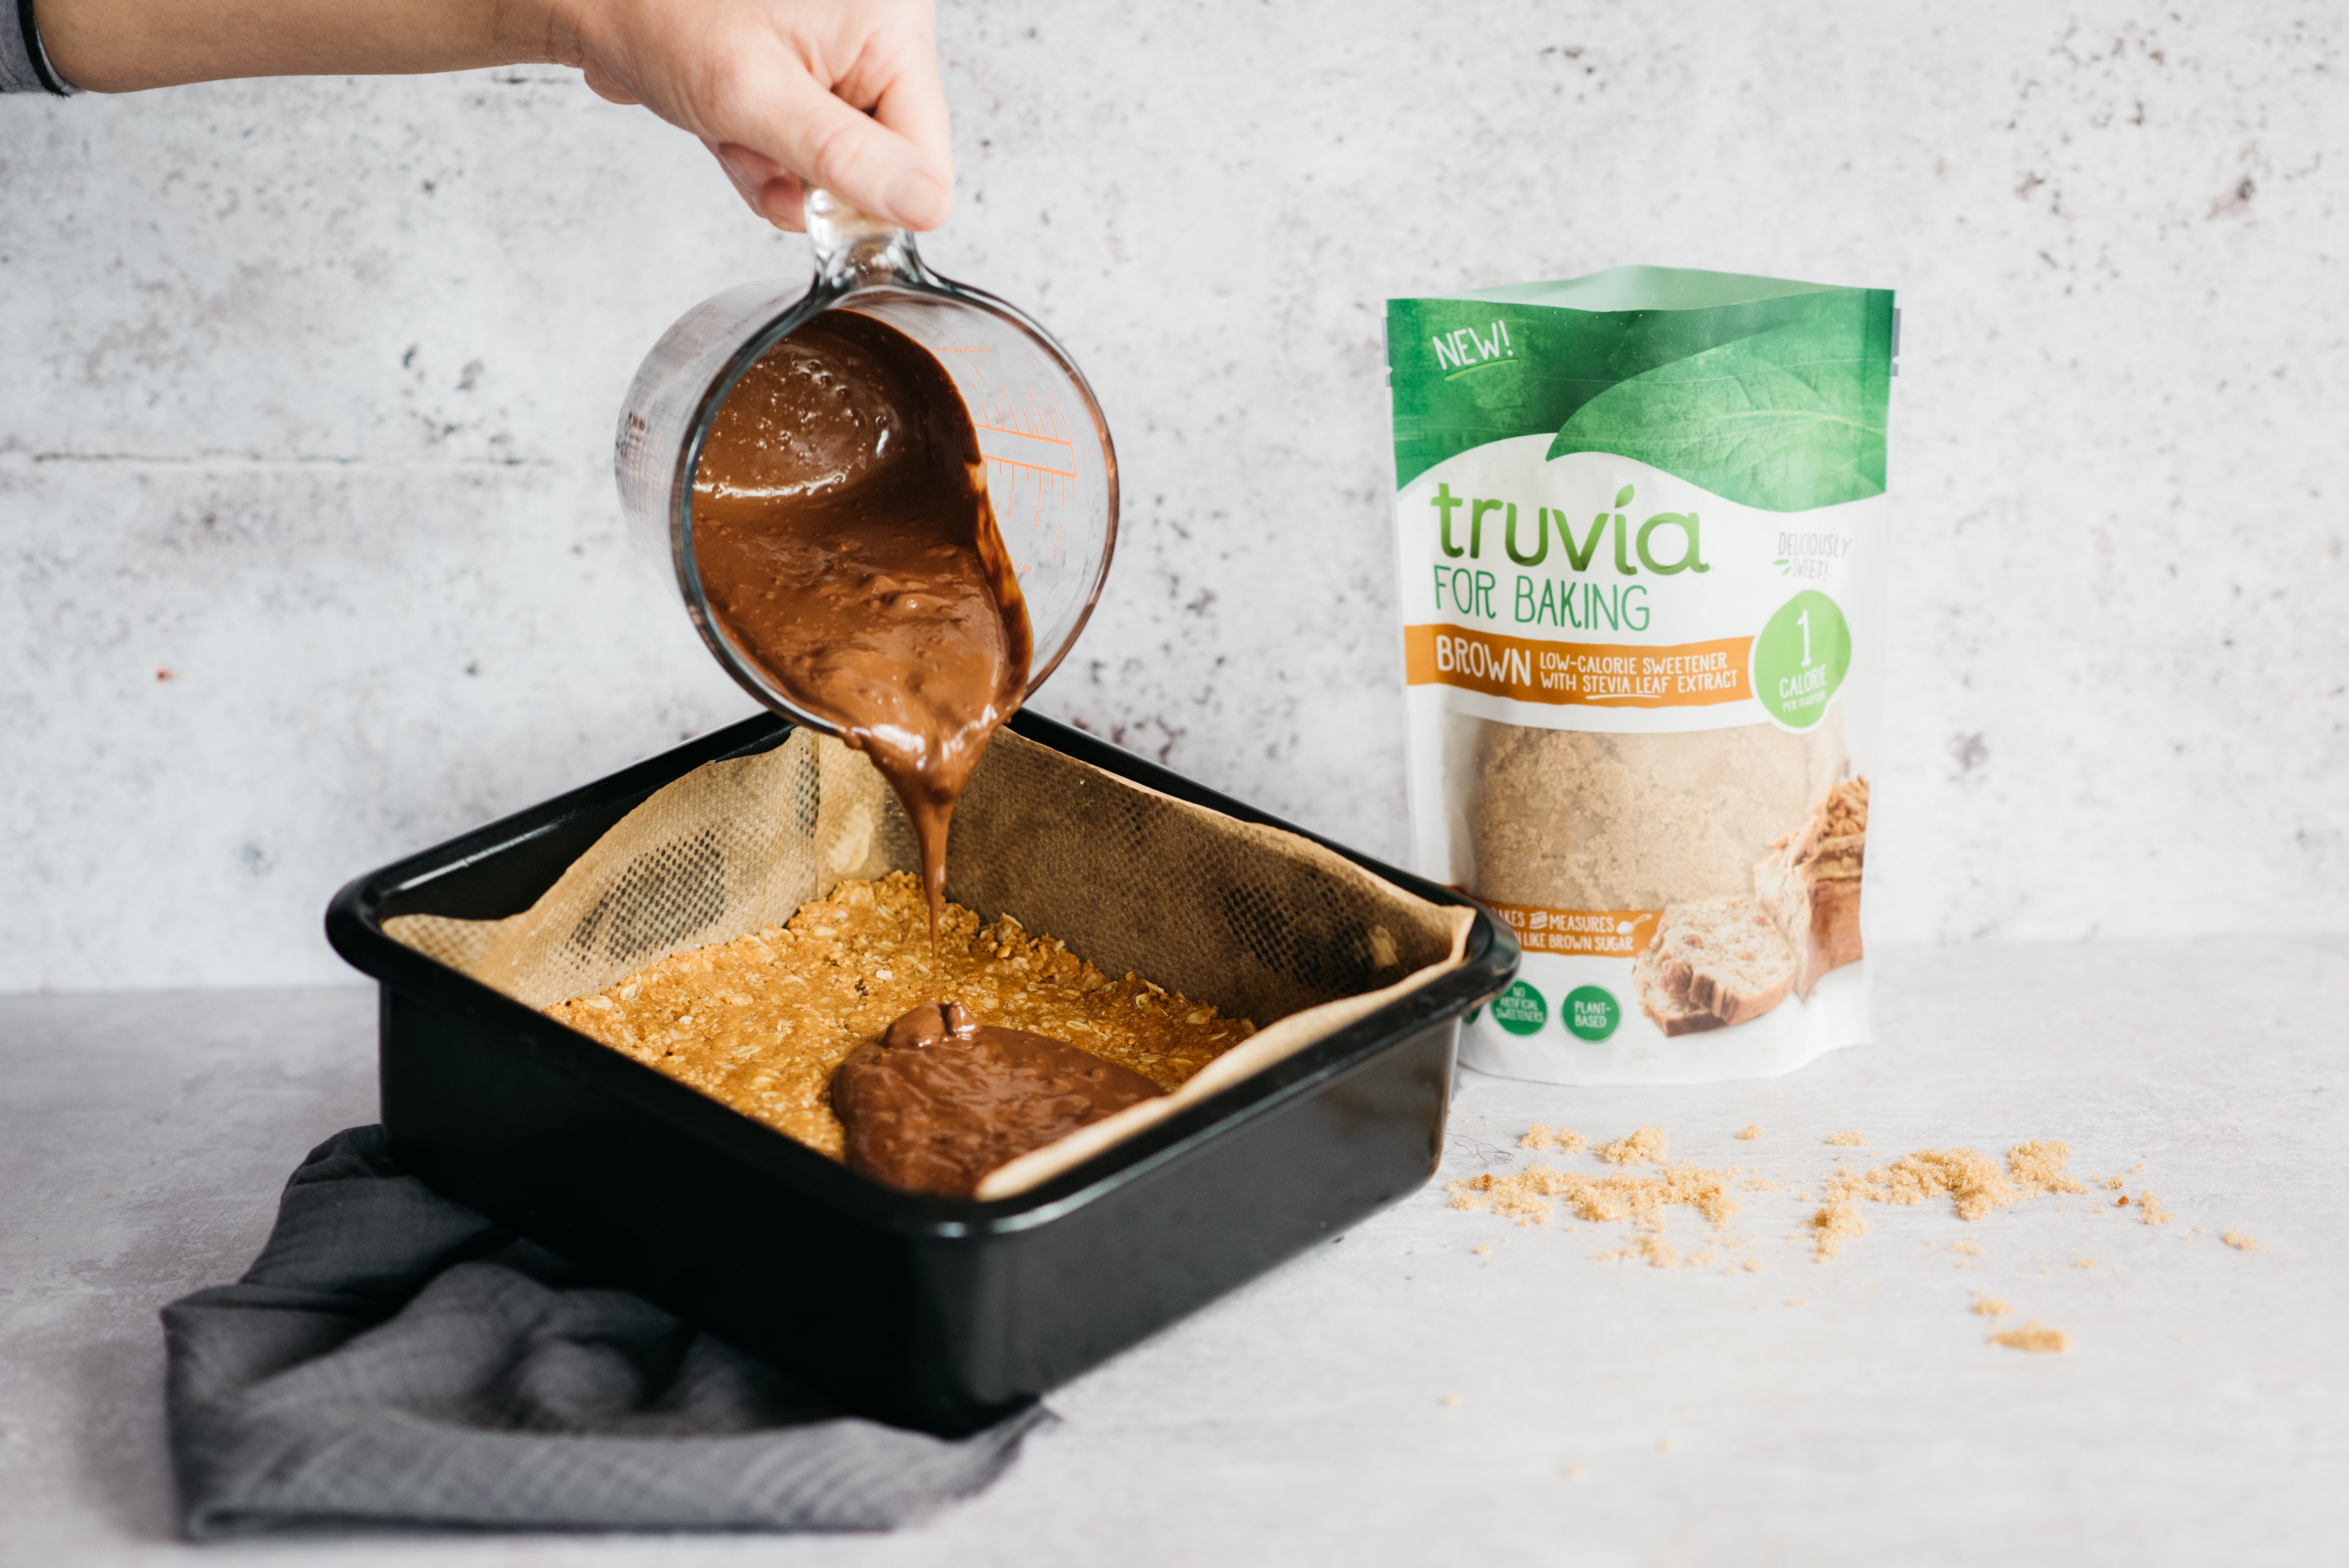 Melted chocolate being poured onto a oat based, next to a bag of Truvia for Baking Brown